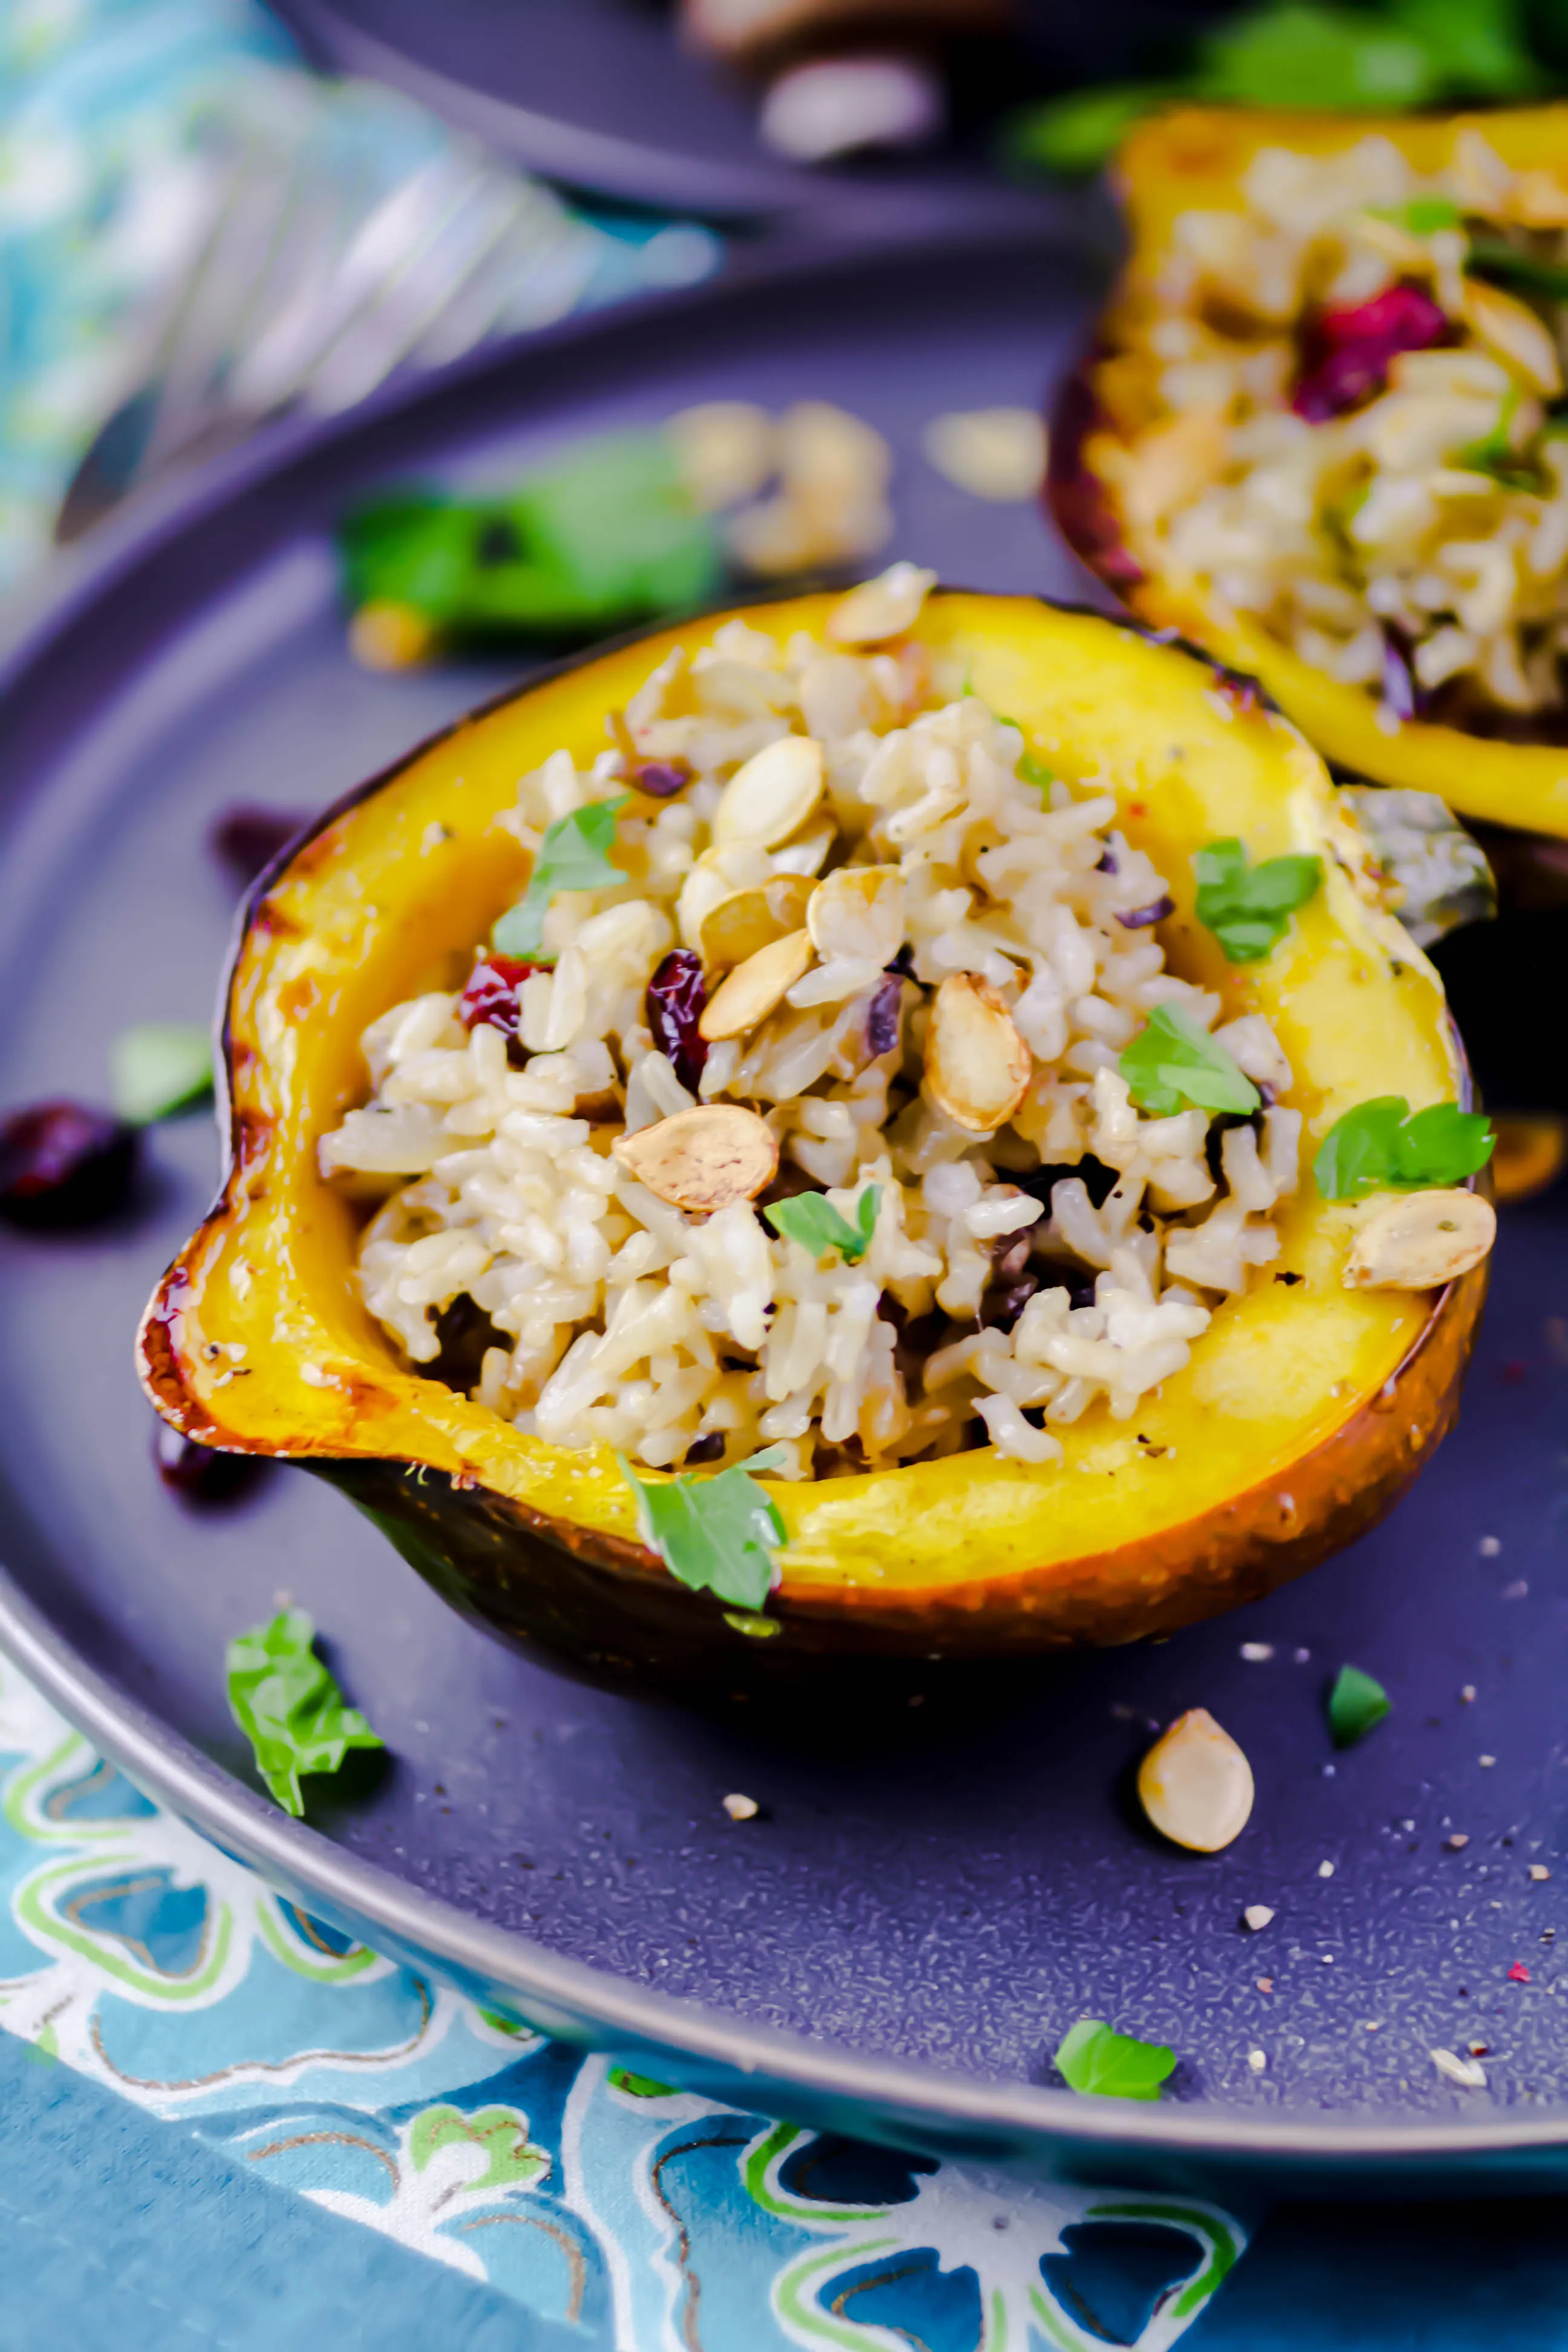 Acorn Squash Stuffed with Brown Rice, Mushrooms, and Cranberries is a lovely meal. Acorn Squash Stuffed with Brown Rice, Mushrooms, and Cranberries is a fun dish to serve -- and it tastes great, too!